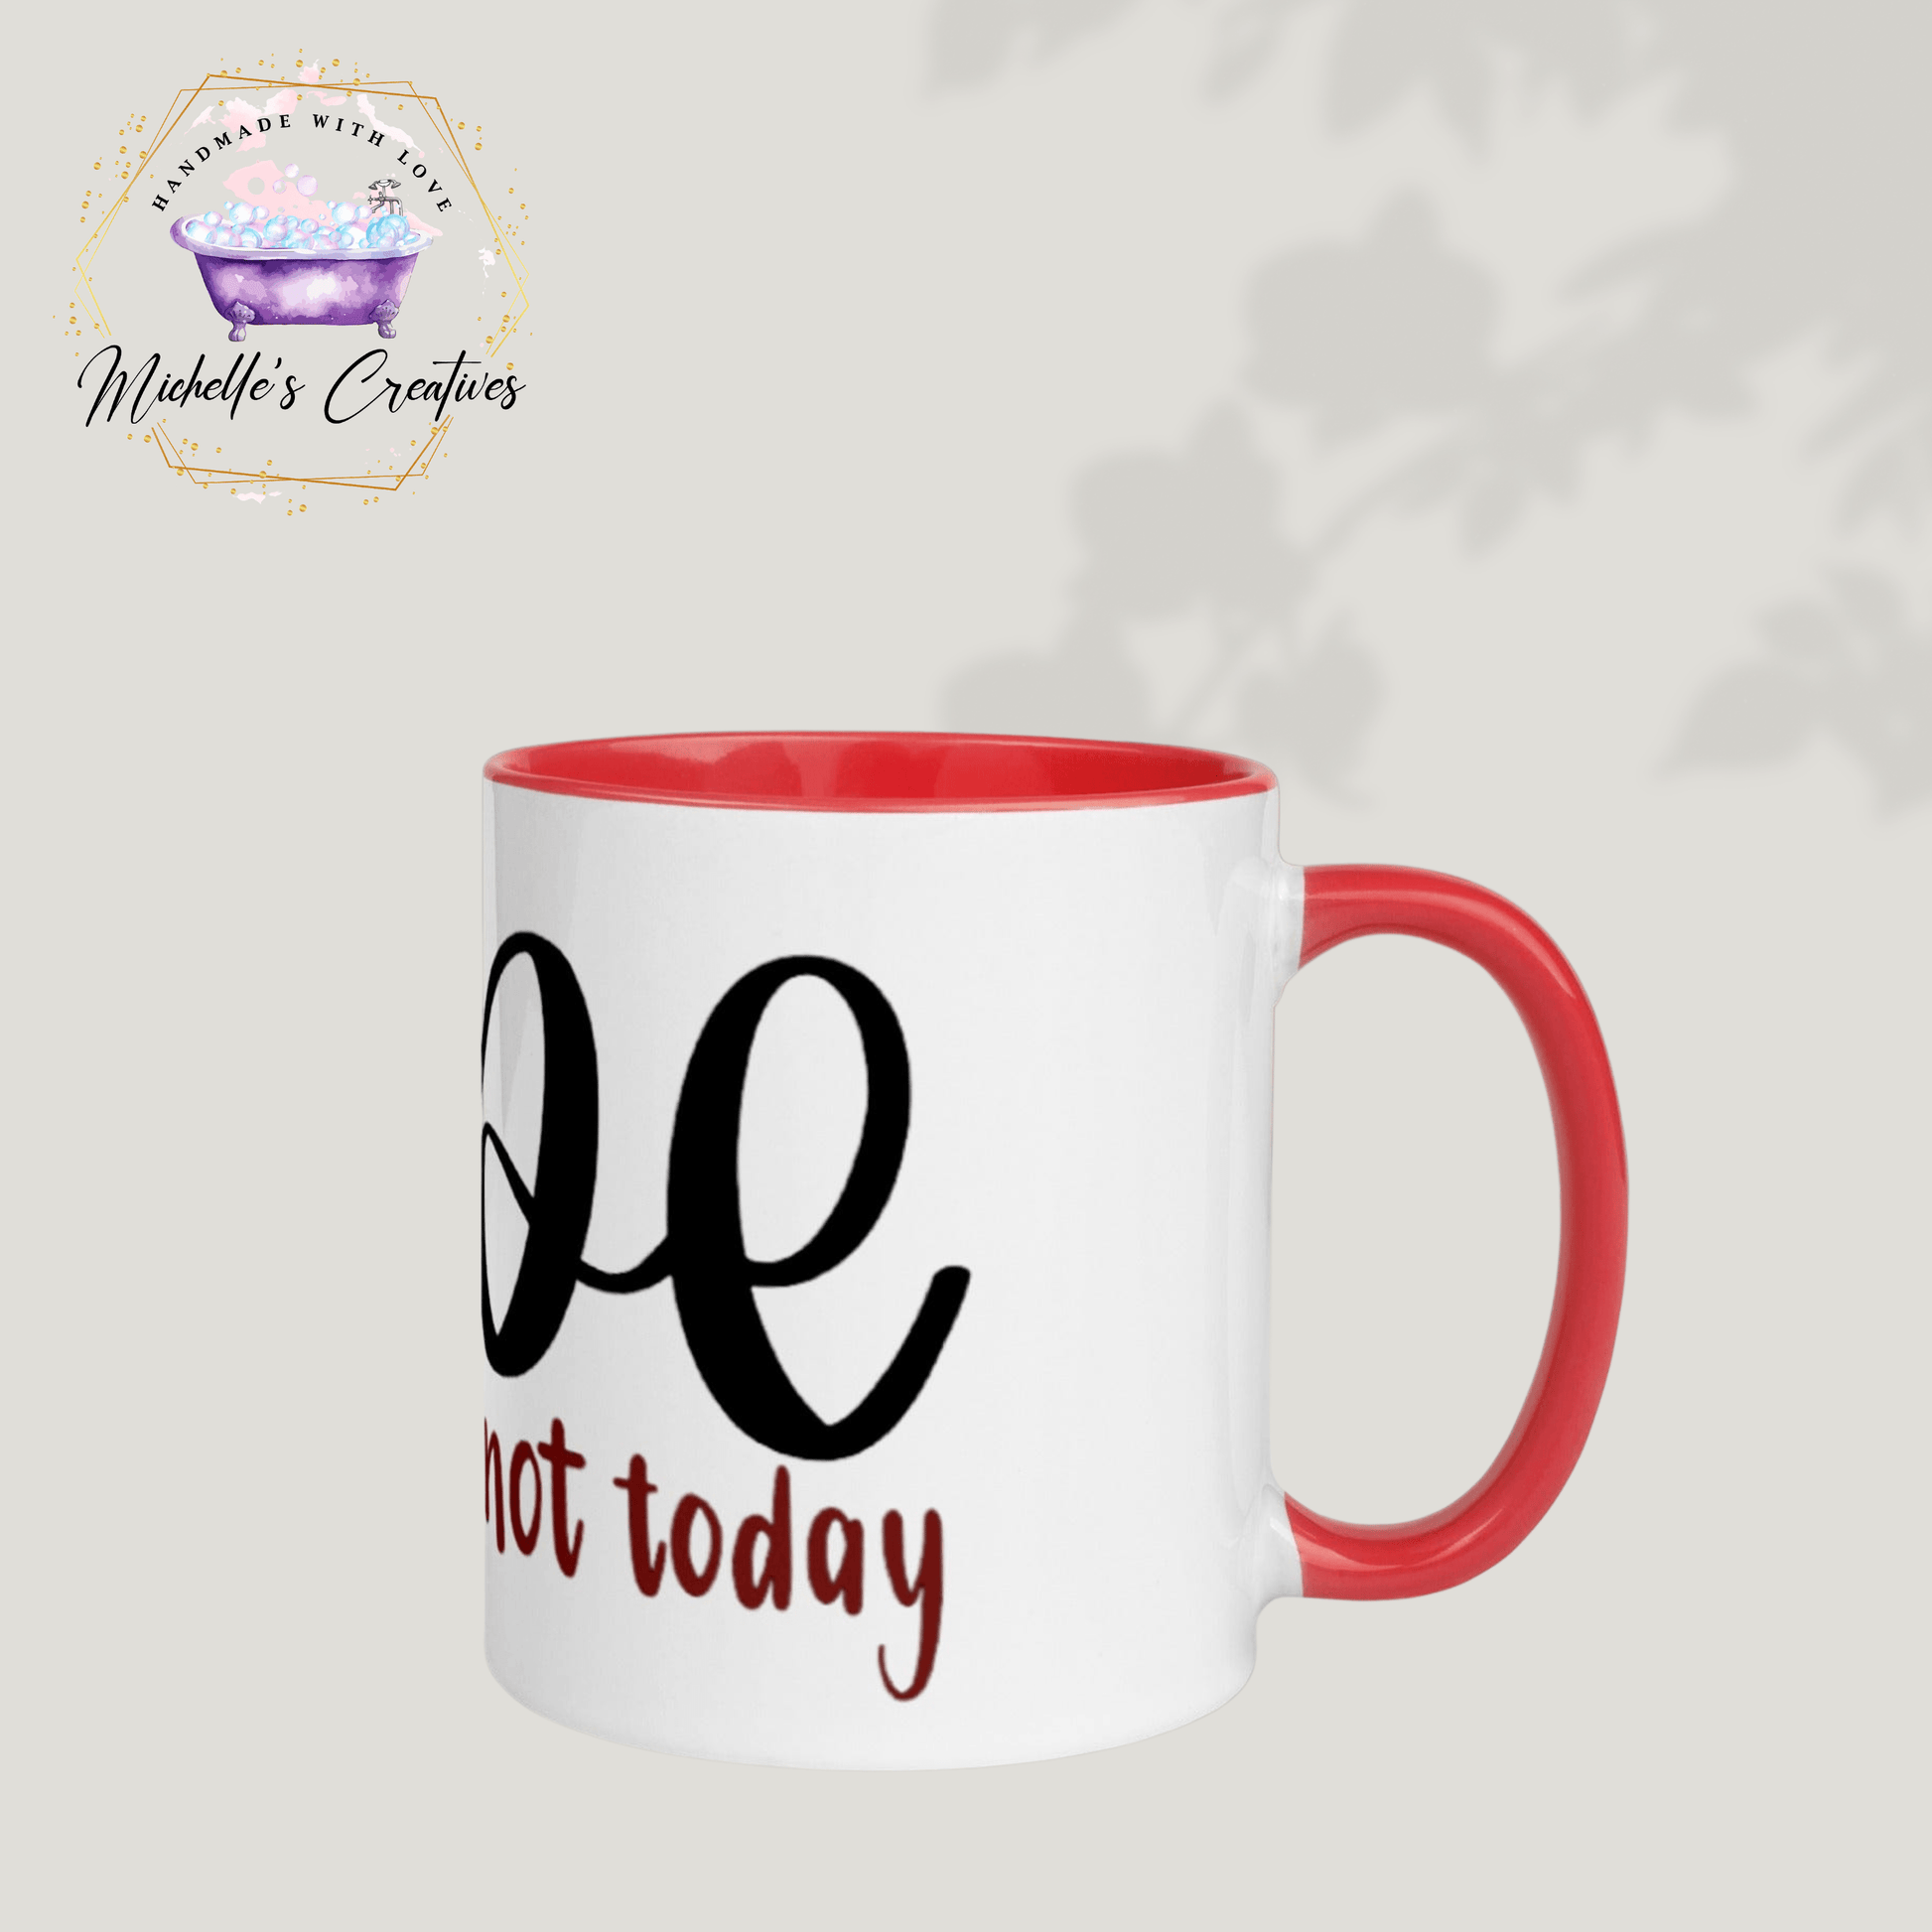 Michelle's Creatives Mugs Nope Not Today Mug with Color Inside 3340166_11049